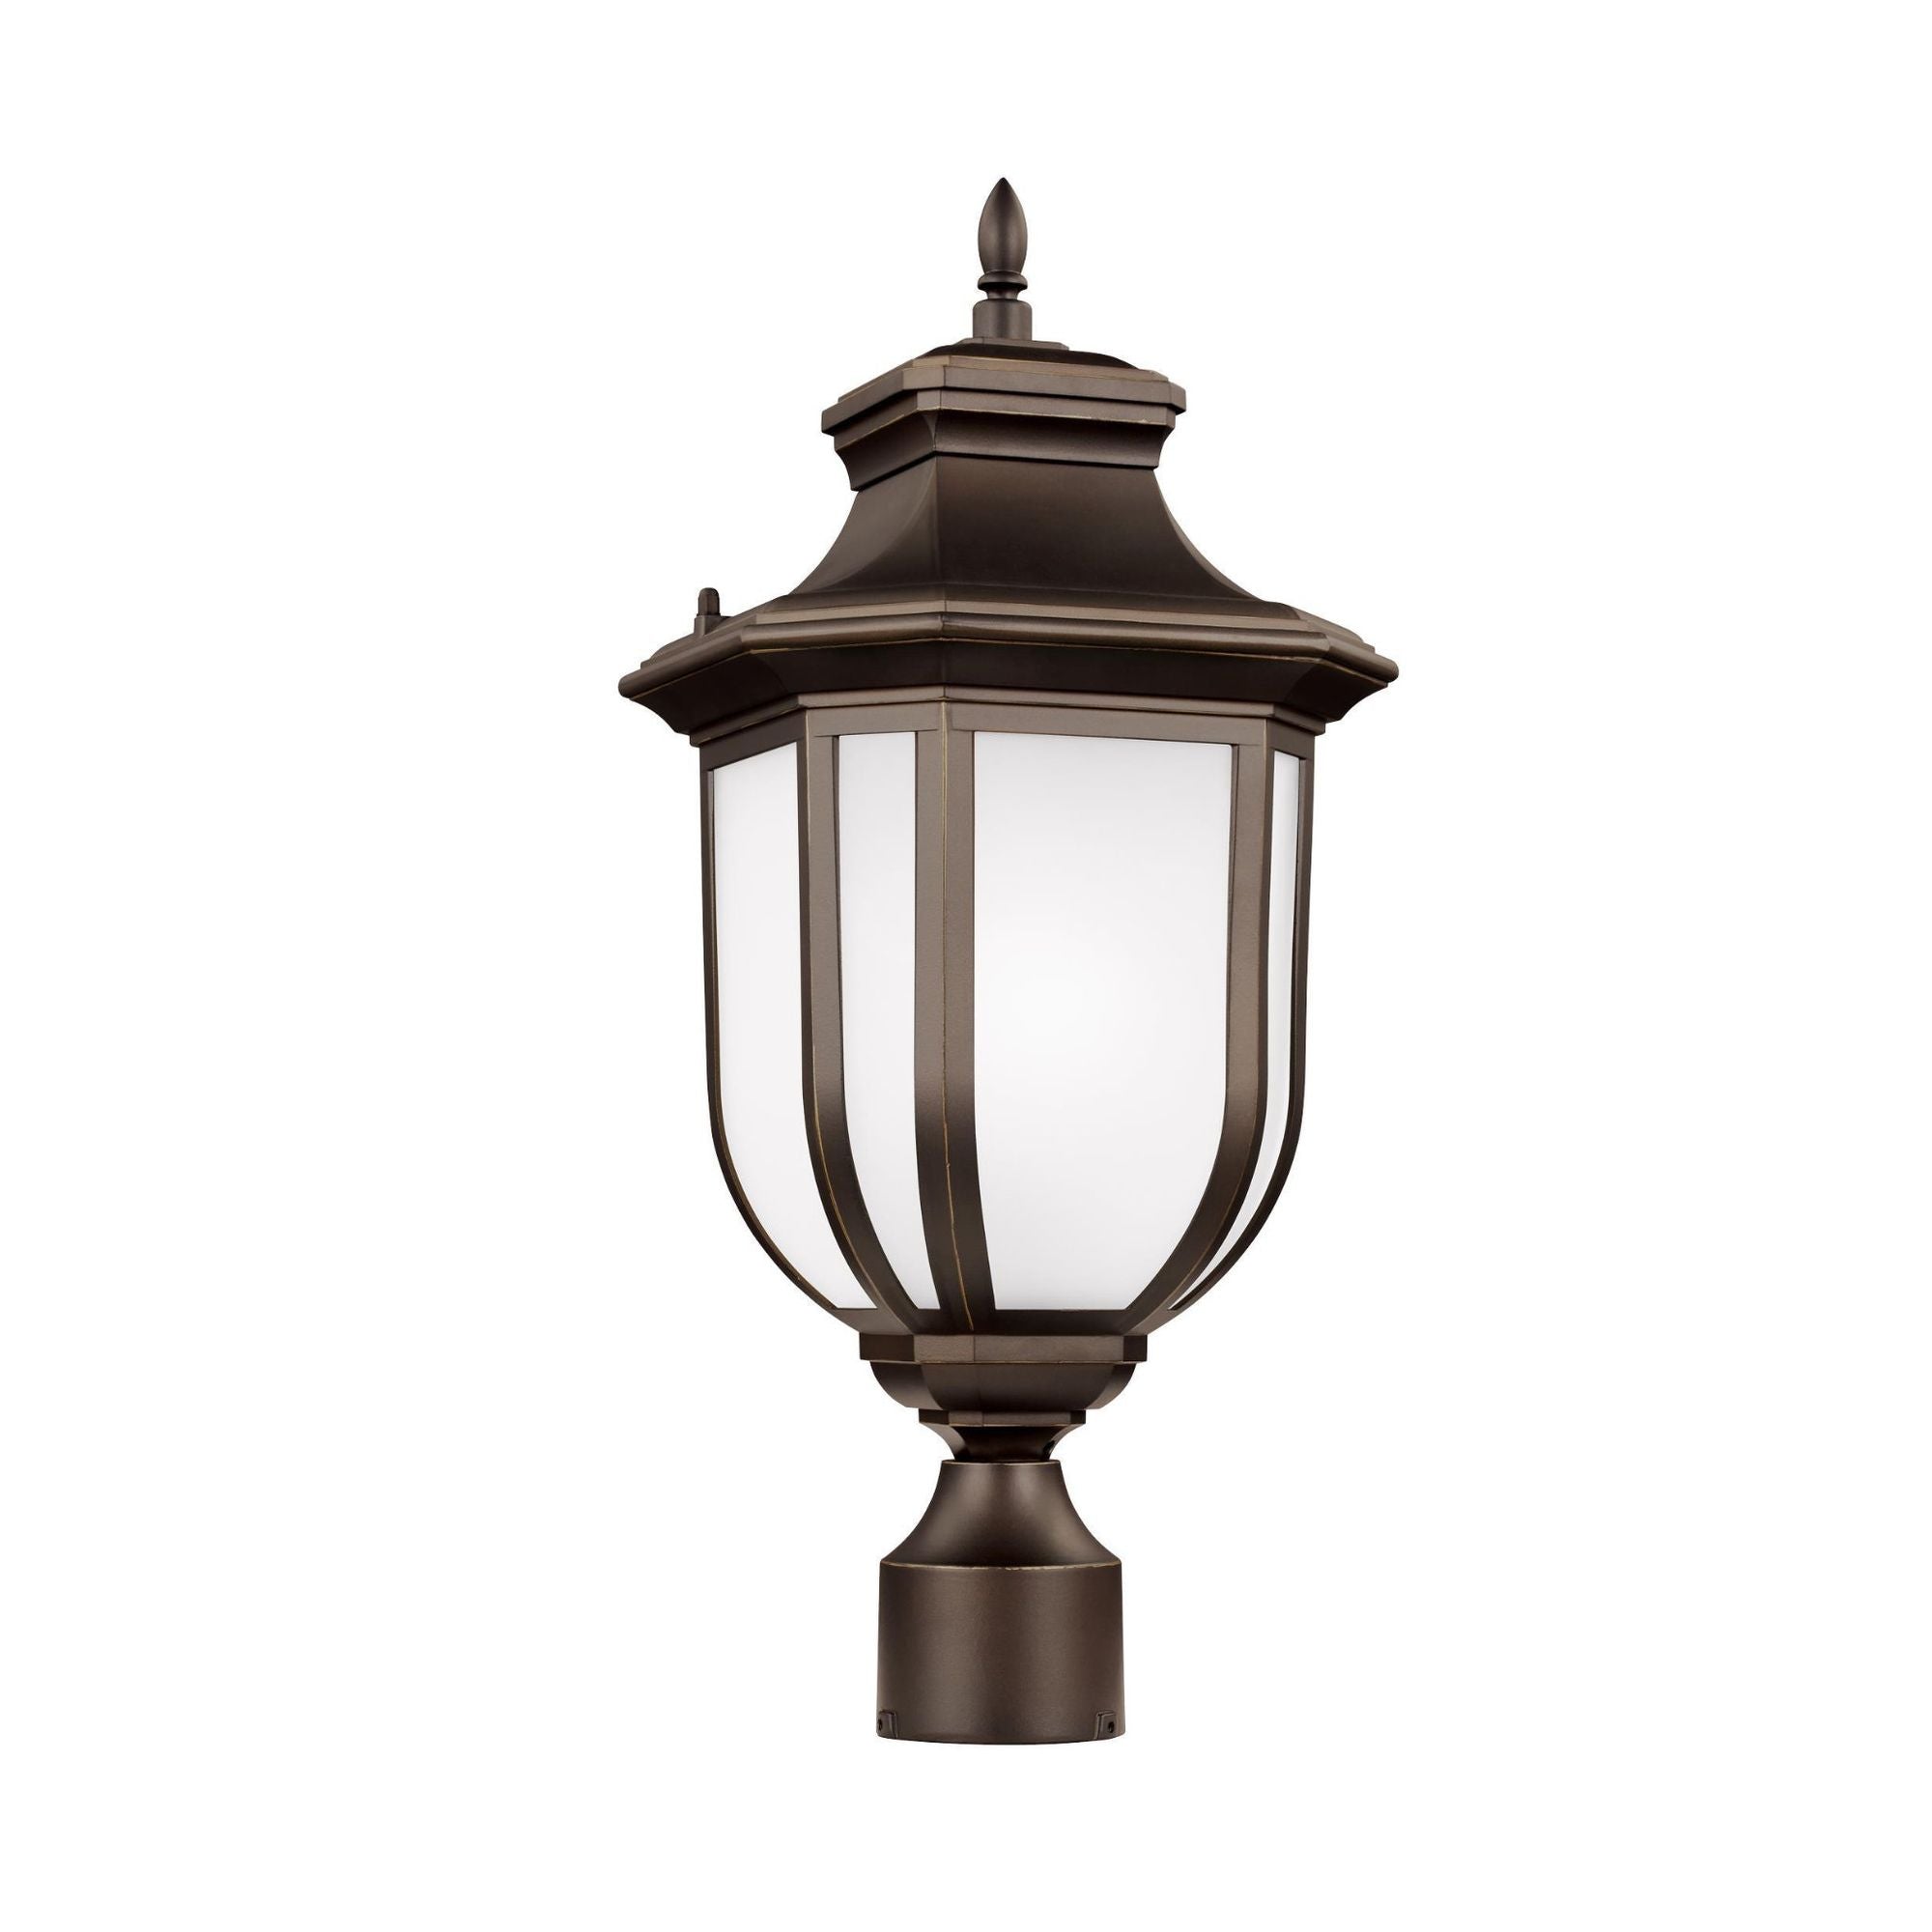 Childress One Light Outdoor Post Lantern LED Traditional Fixture 20.5" Height Die Cast Aluminum Satin Etched Shade in Antique Bronze